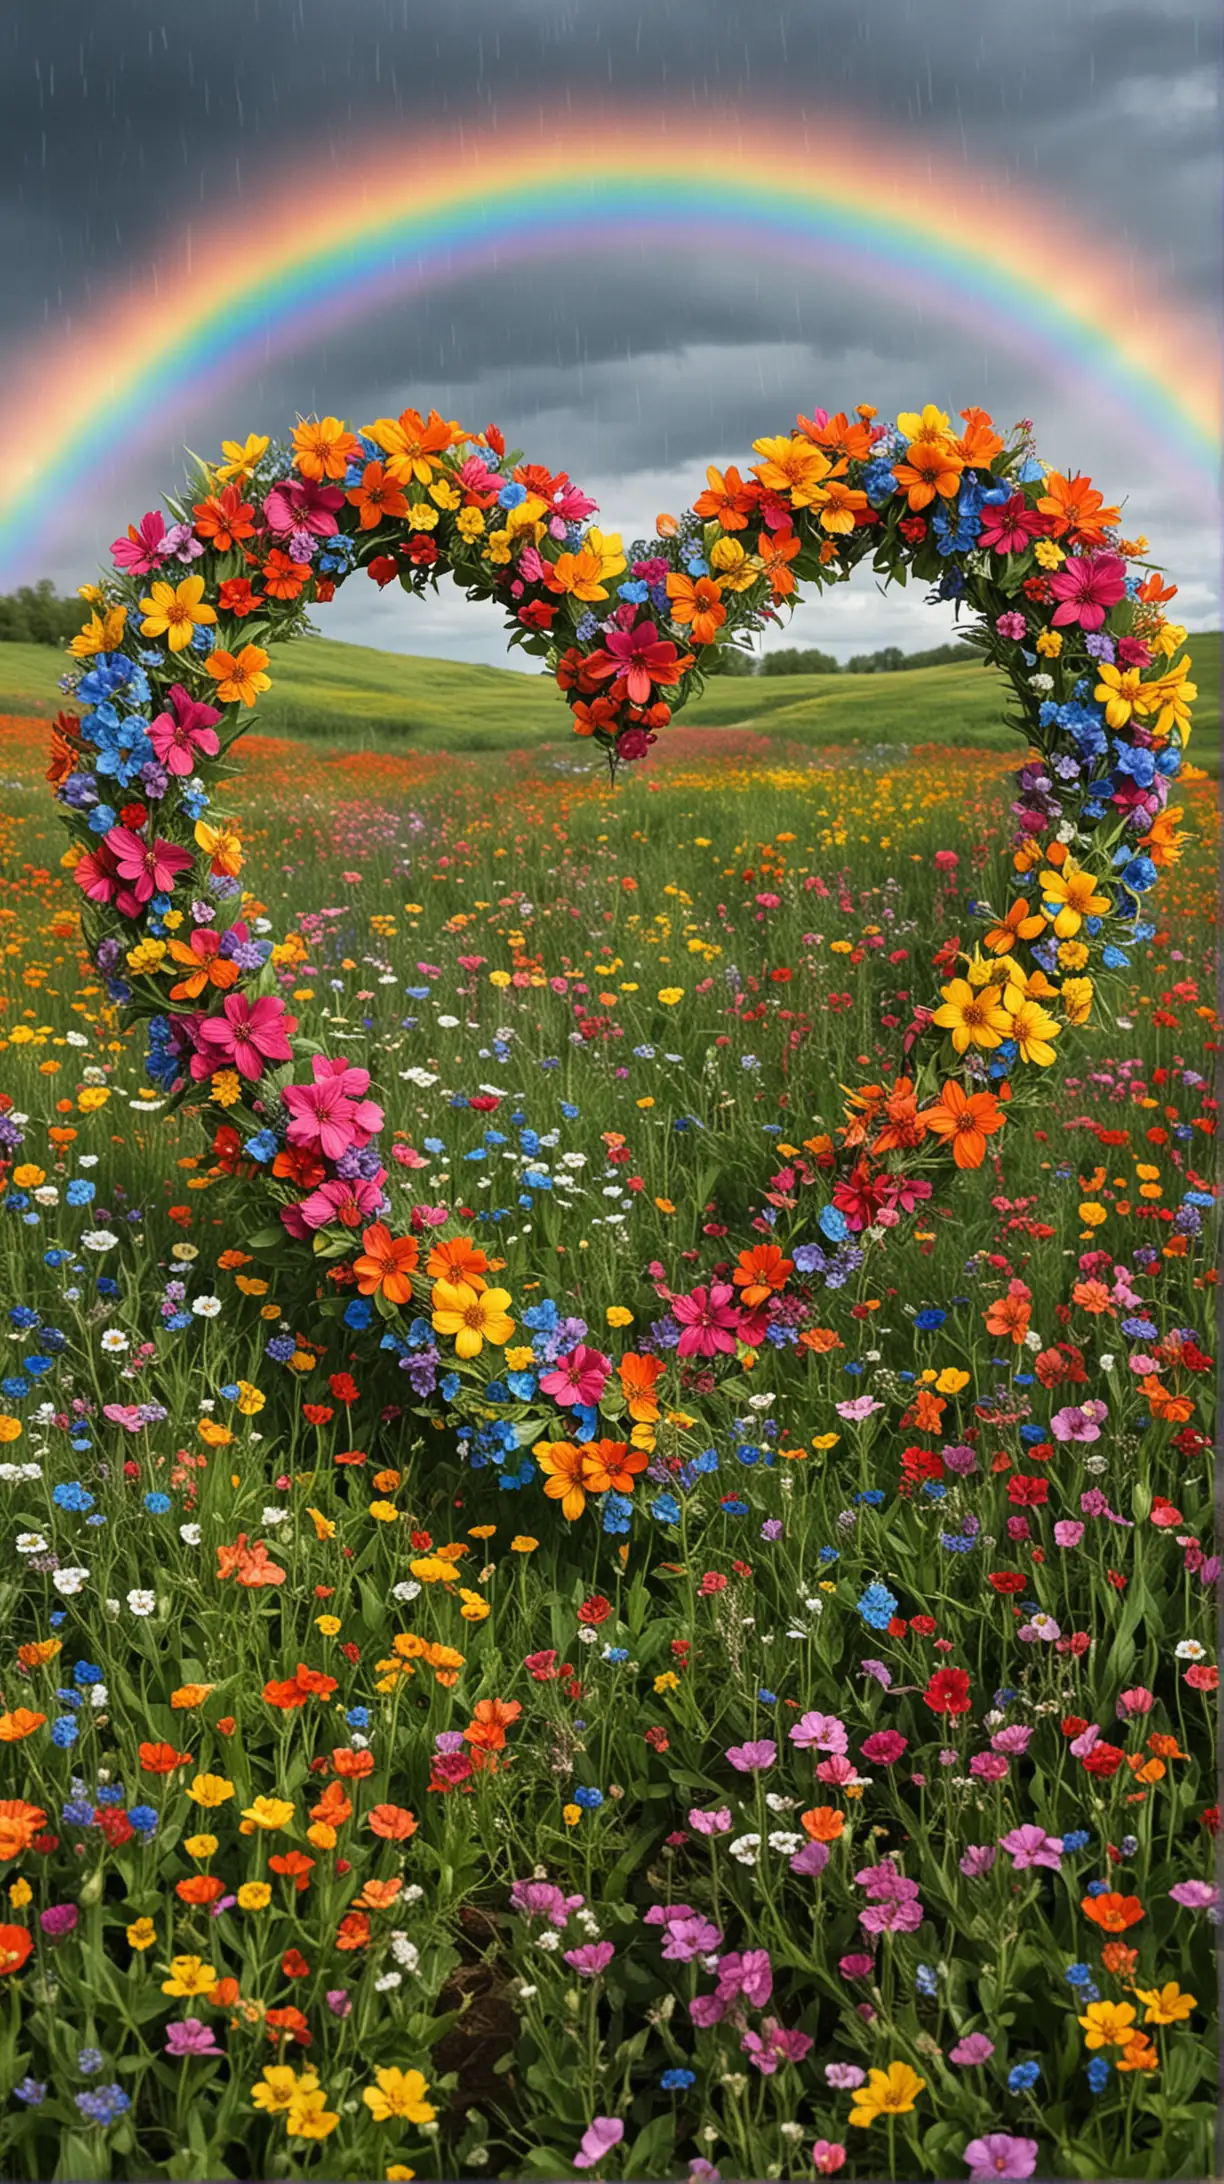 Rainbow Wildflower Heart Wreath in Magical Oil Pastel Style